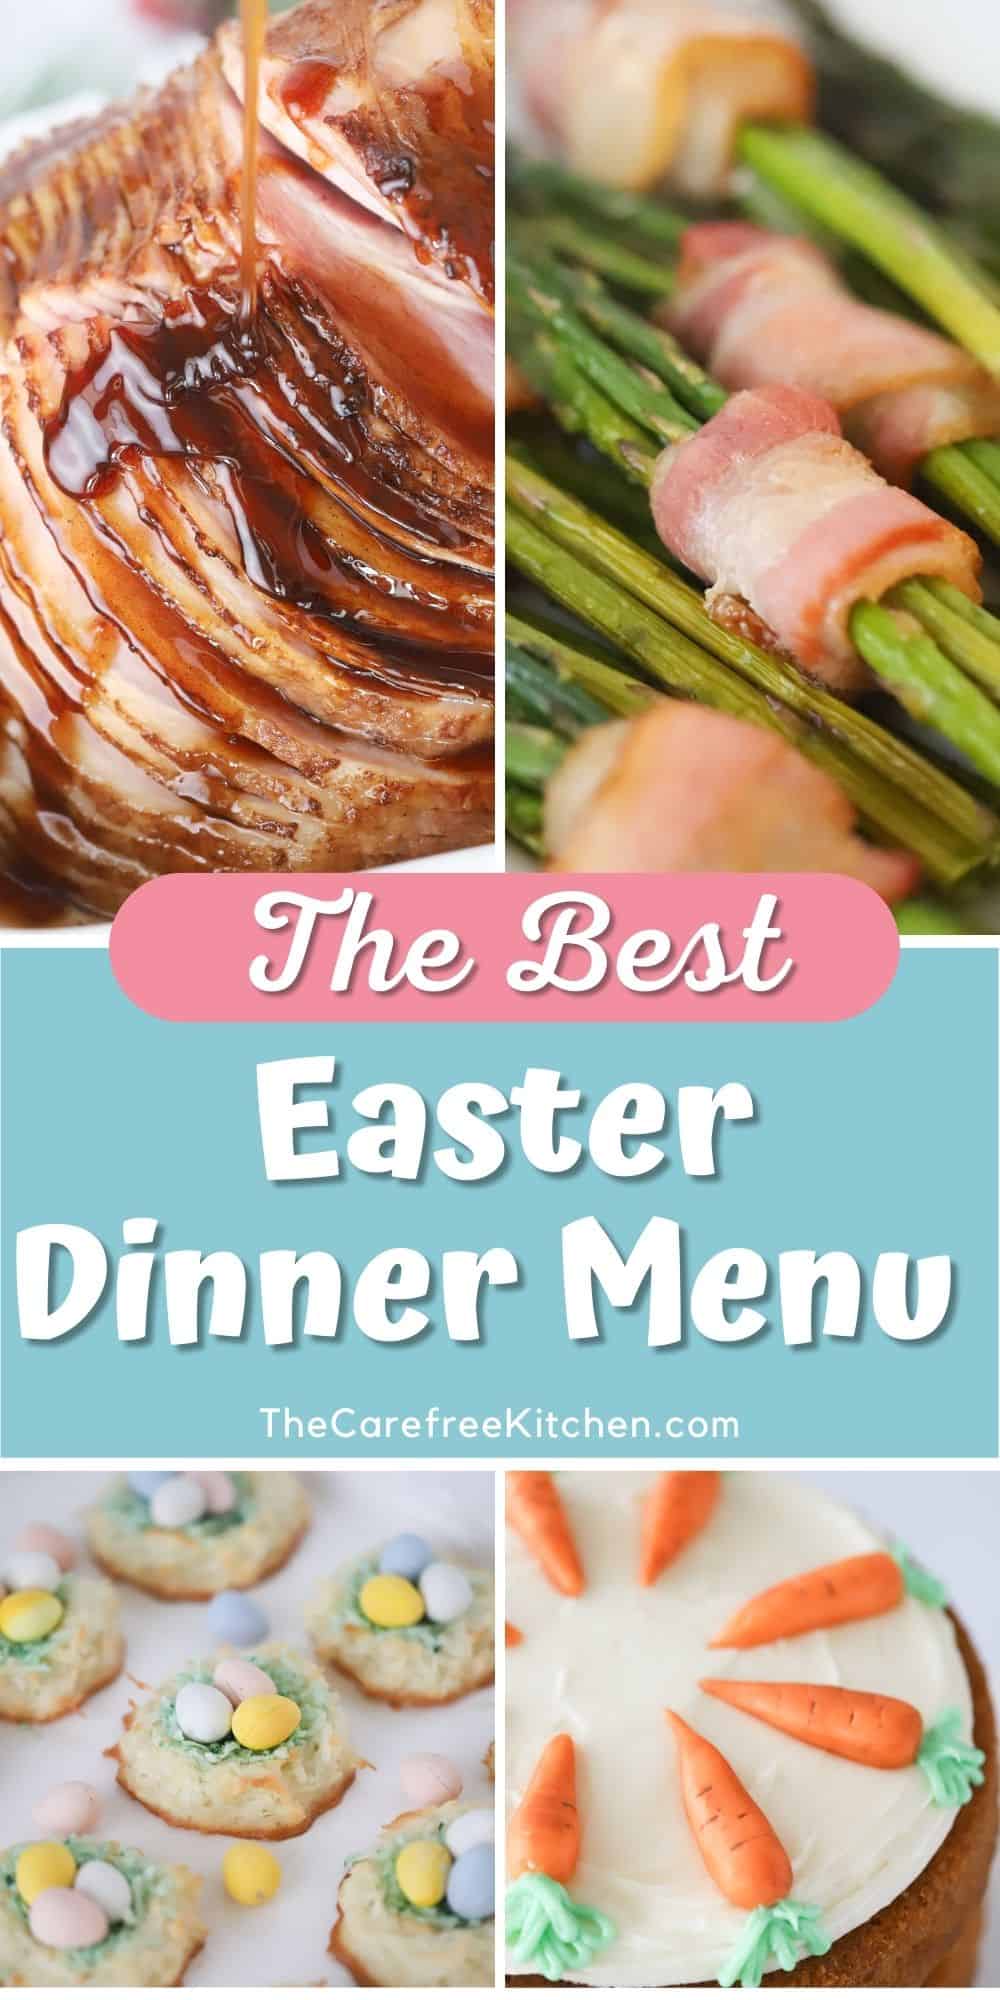 Delicious and Easy Easter Dinner Menu - The Carefree Kitchen